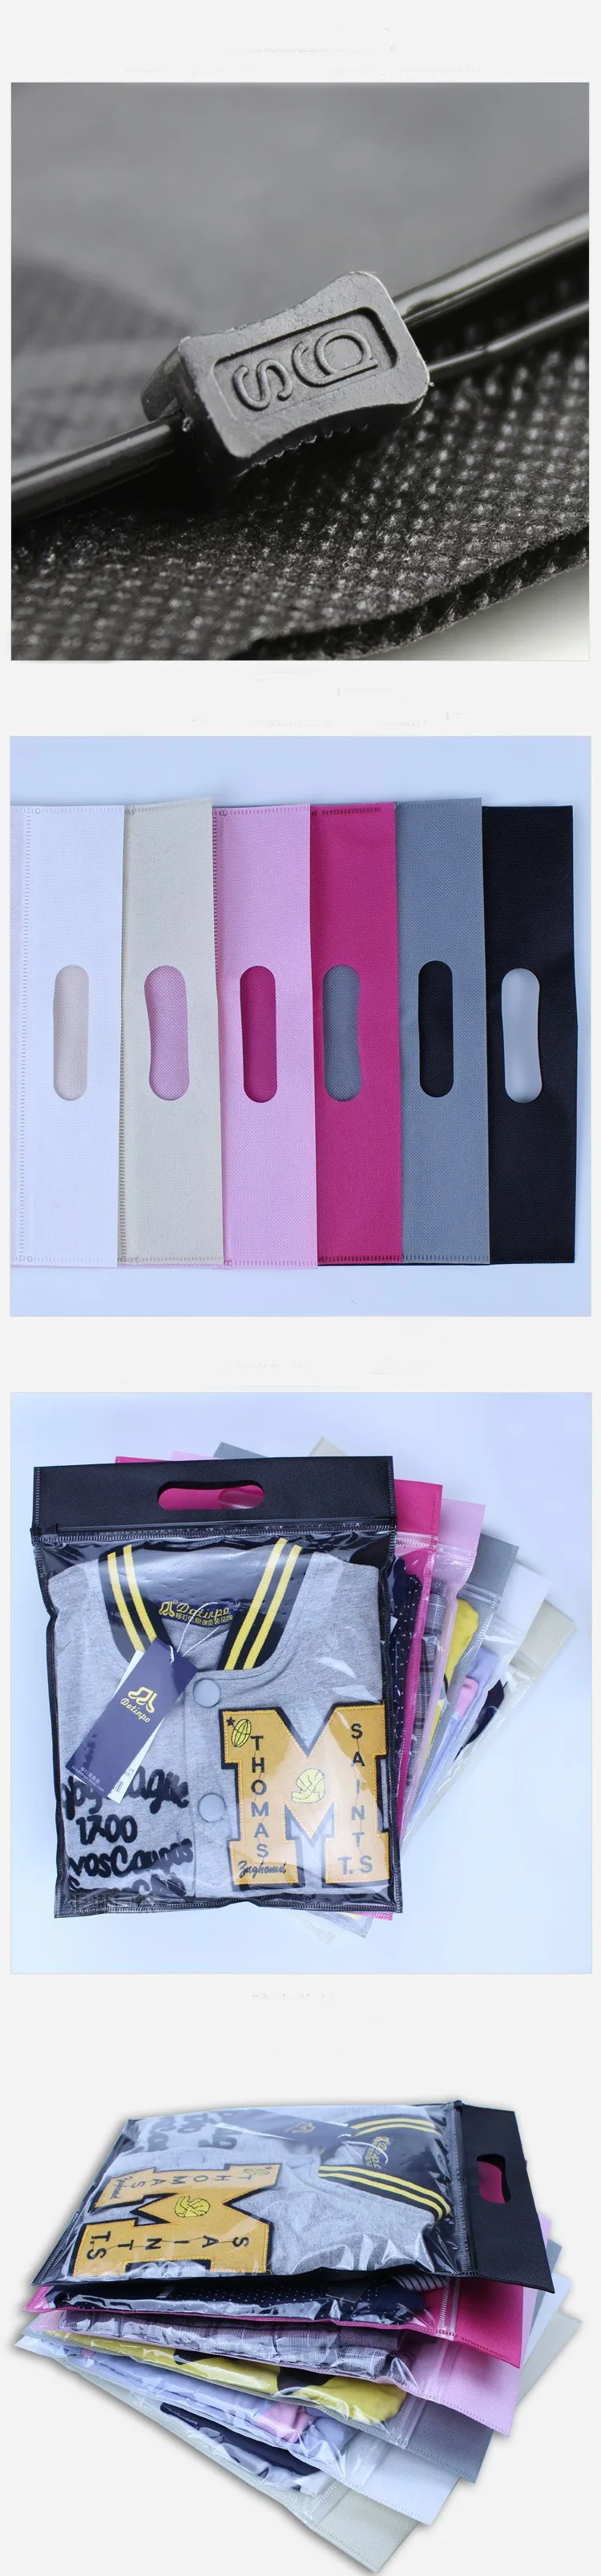 20 Pcs Non Woven Bag Clear Transparent Plastic Package Cloth Travel Storage Pouch Waterproof Bag Zipper Lock Self Seal Cloth Org